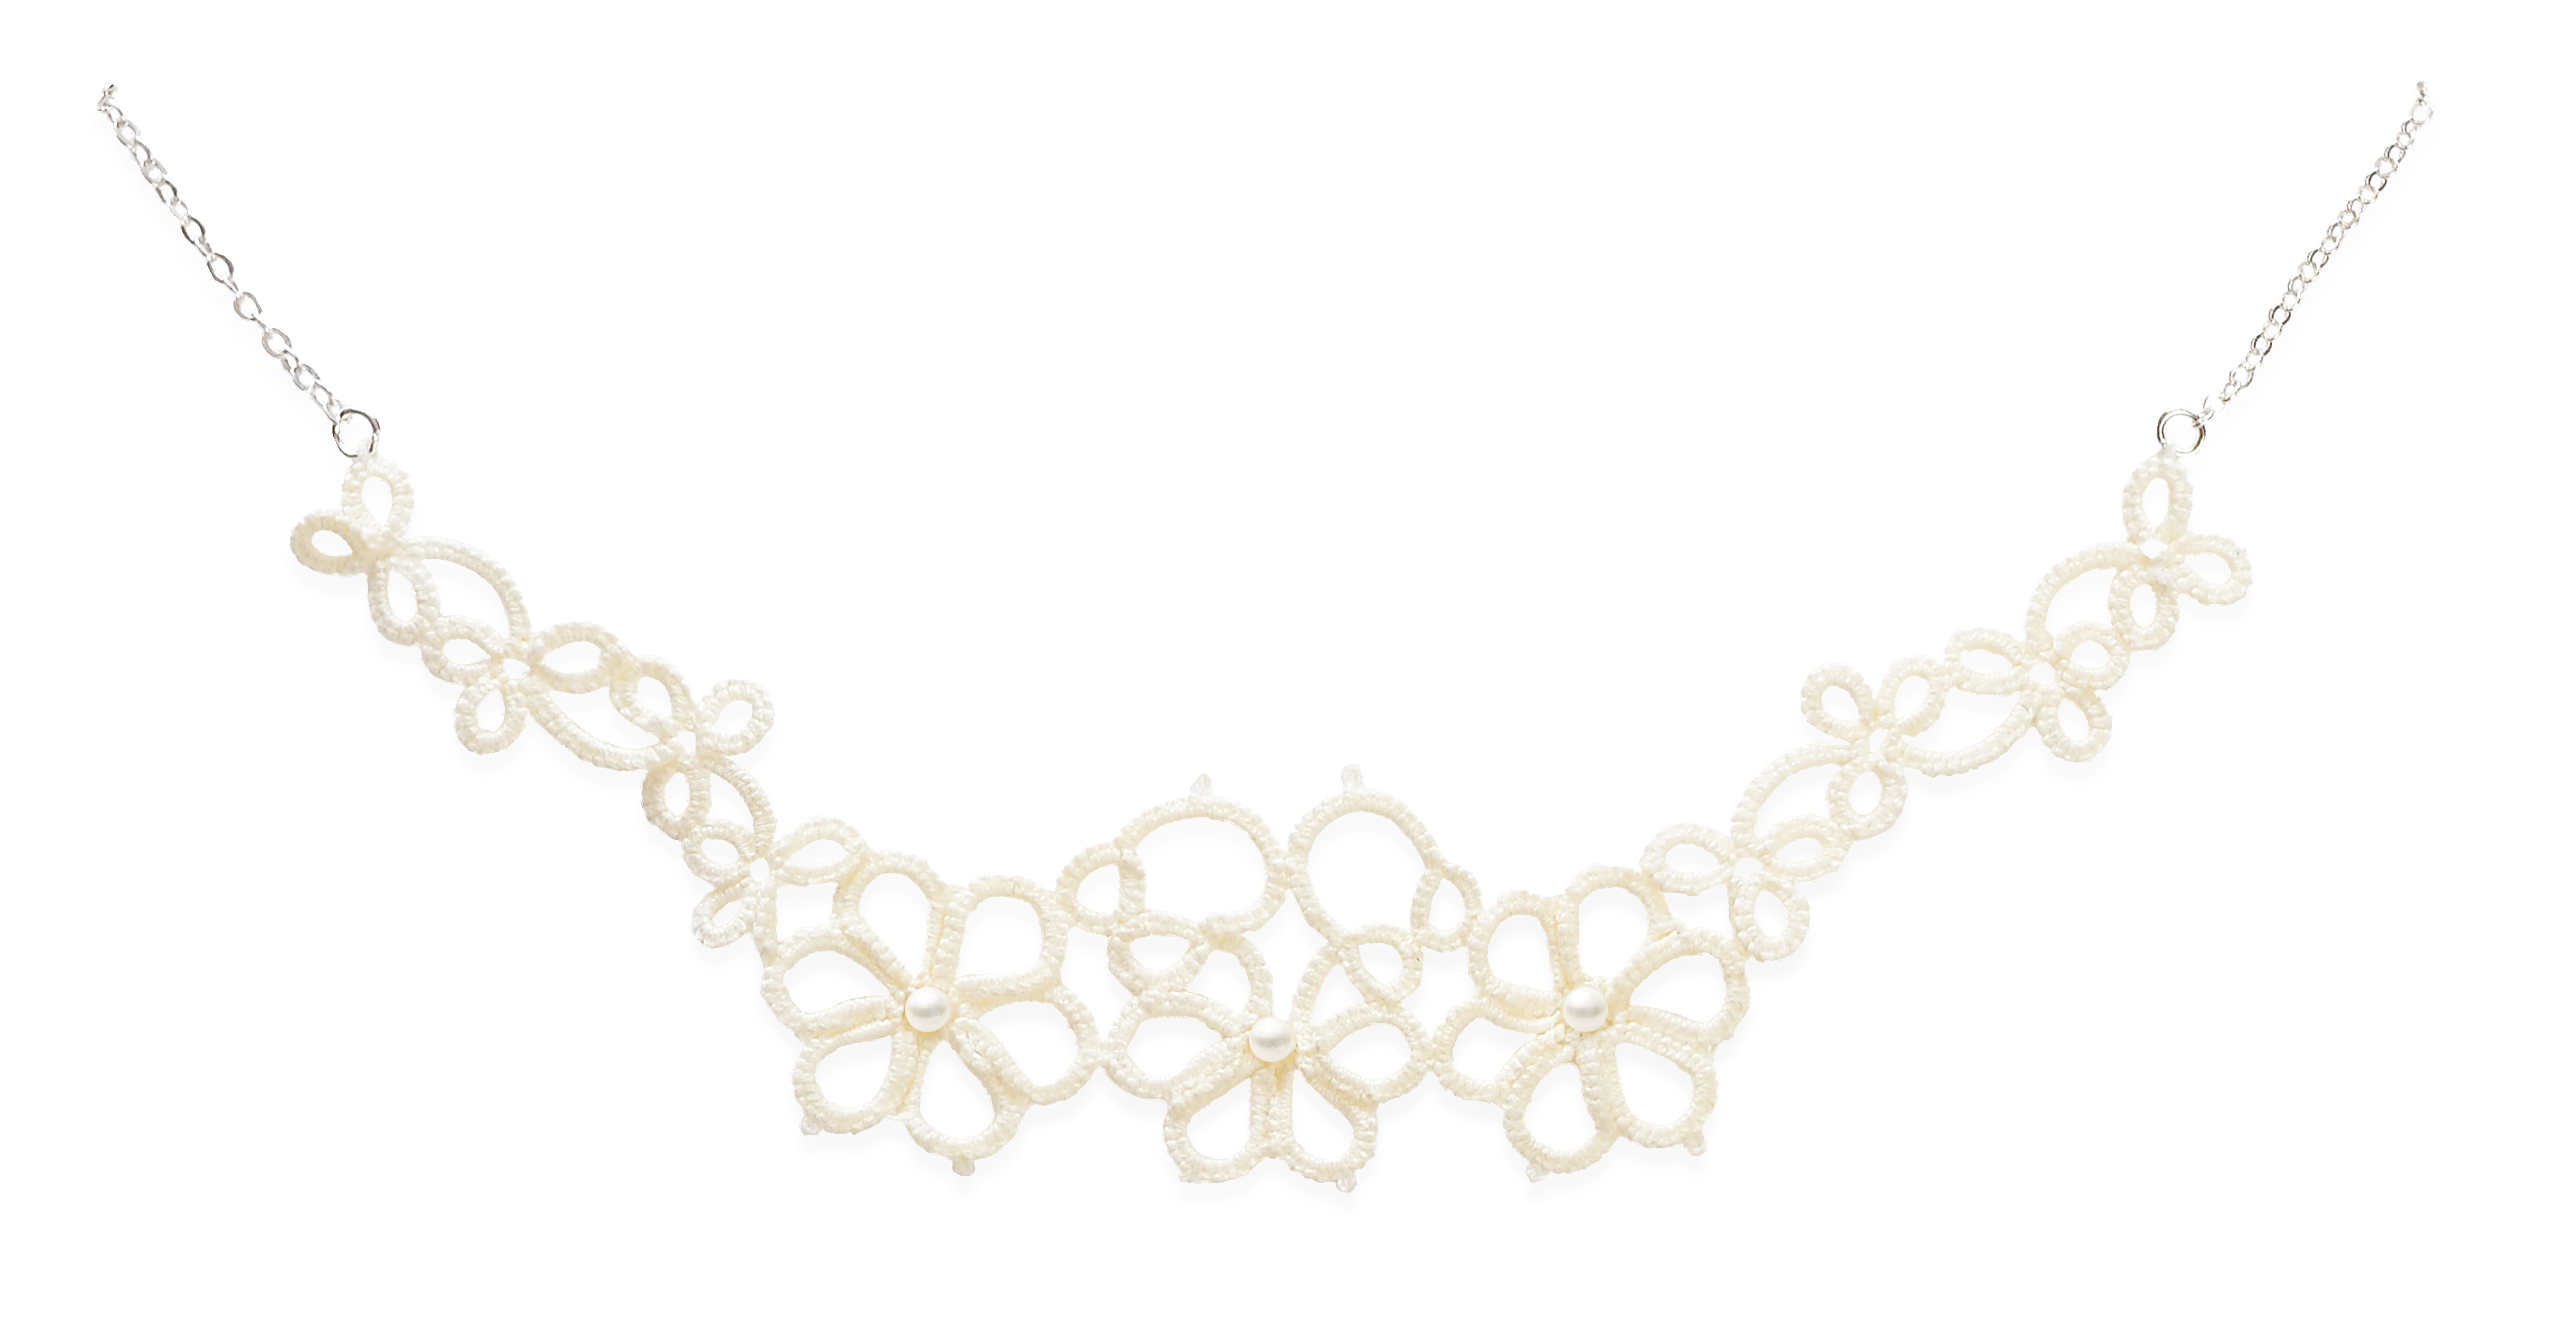 Crochet Magnolia Tatted Necklace White